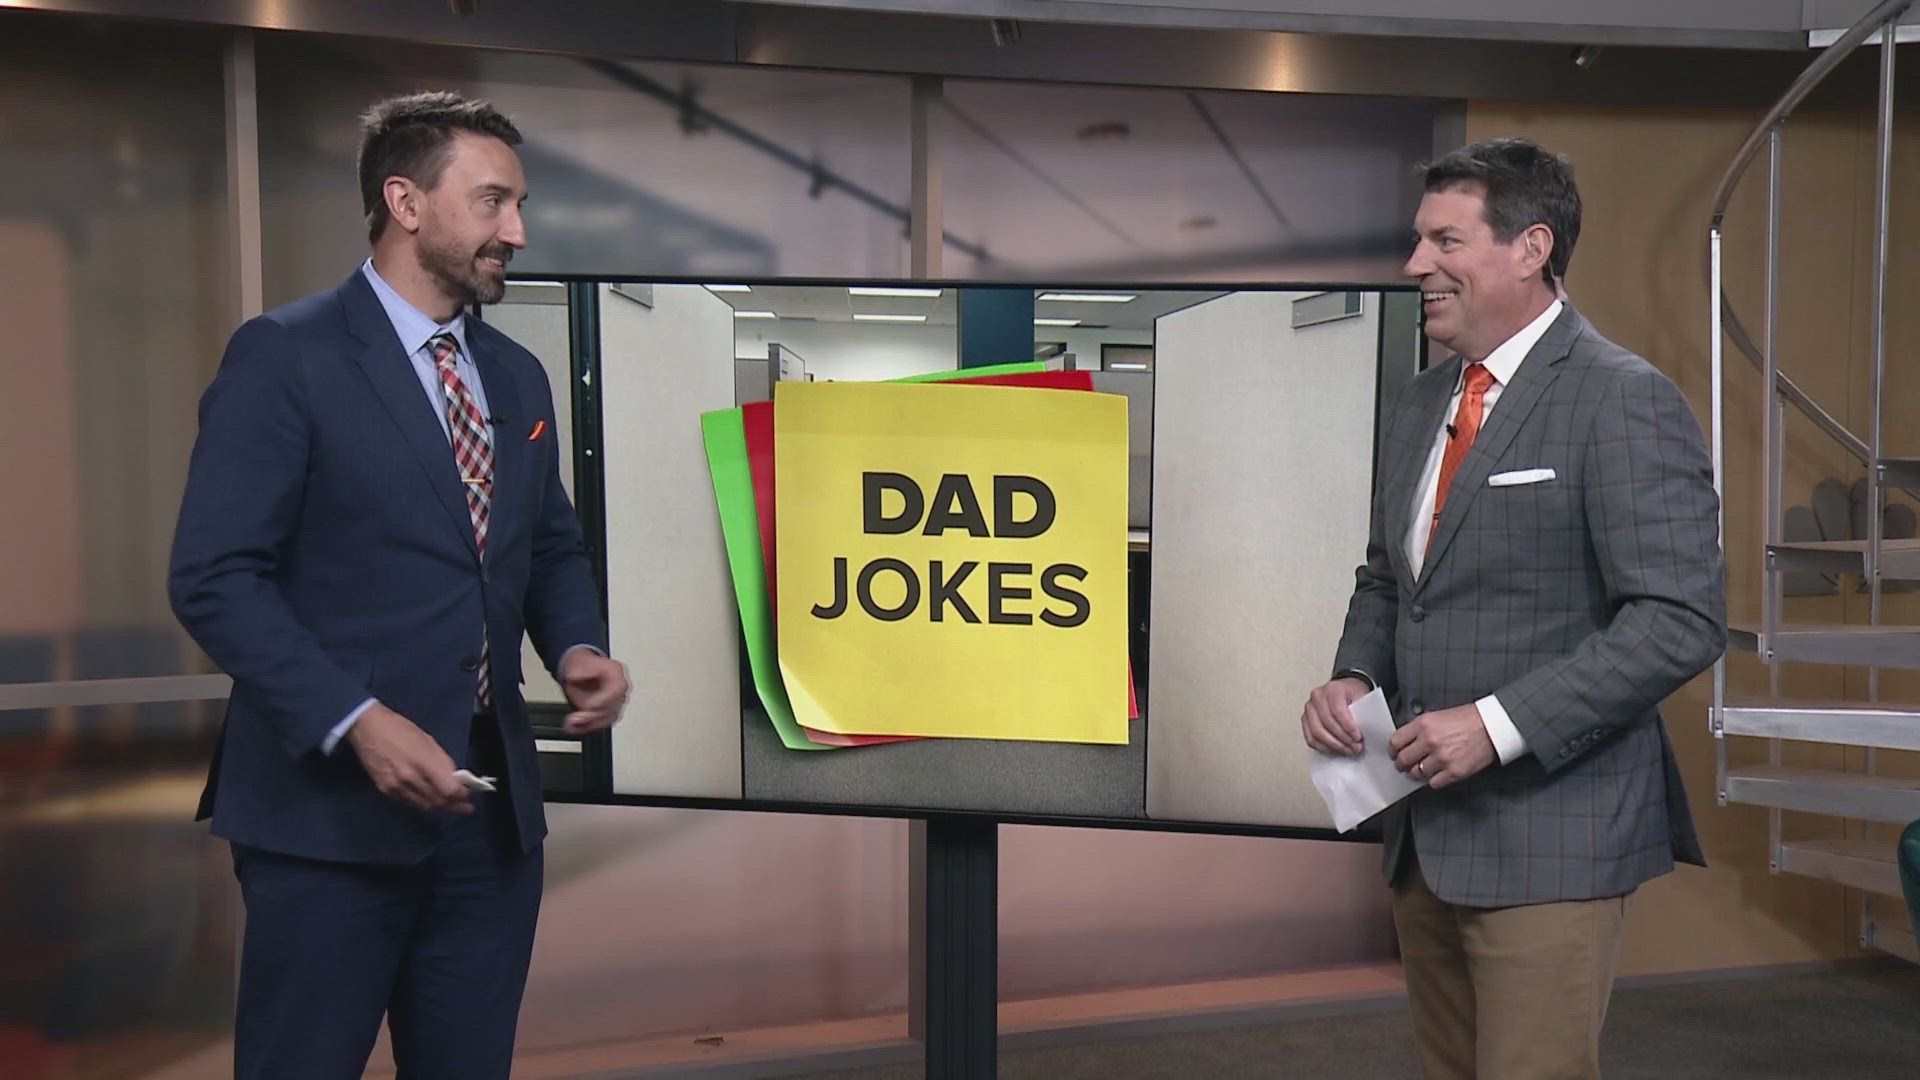 We have more dad jokes for you! Enjoy!